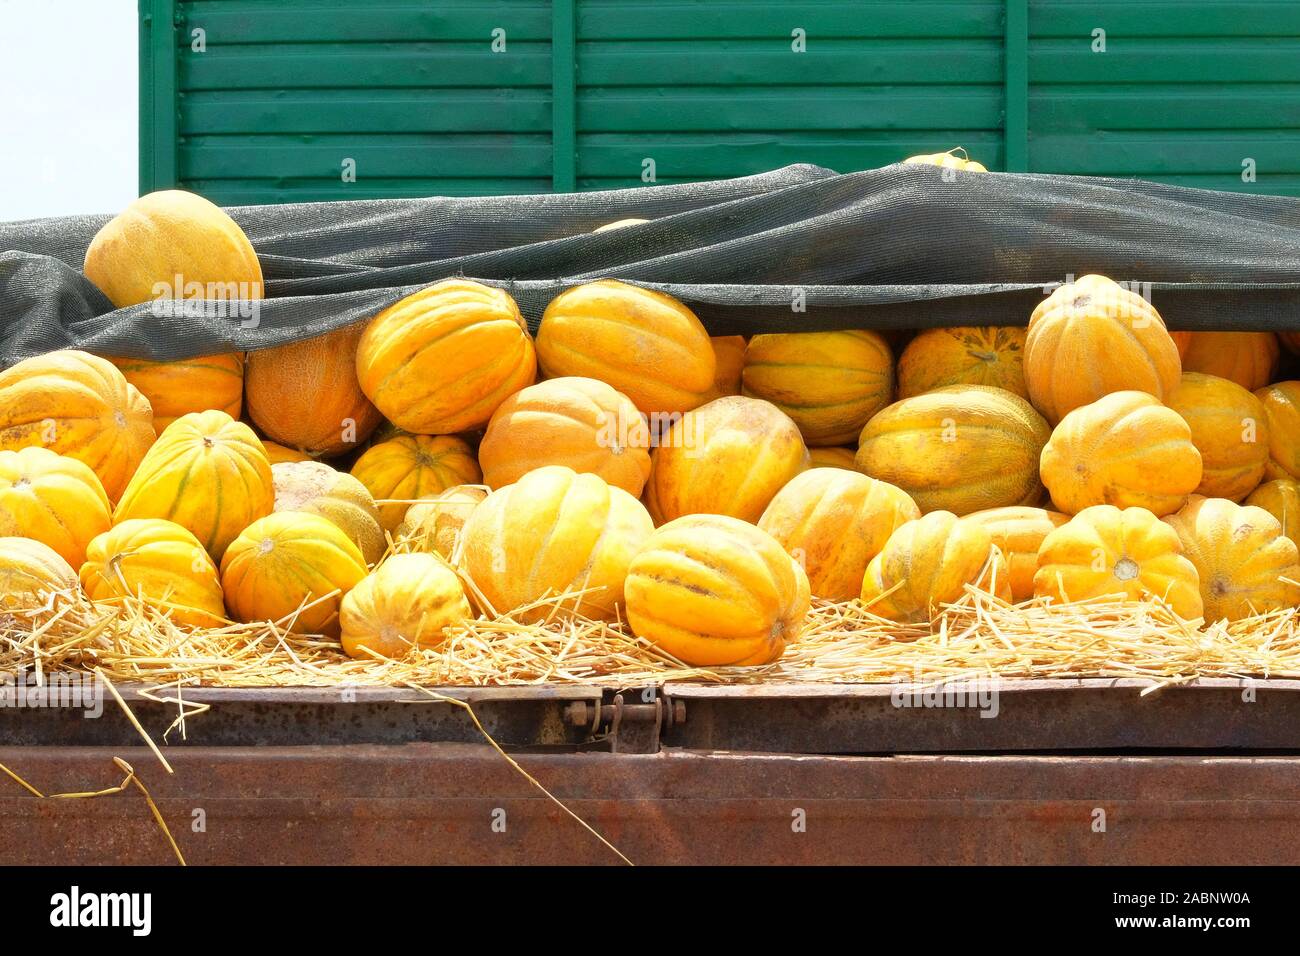 Melons are sold at farmers market after harvest. Healthy eating. Autumn harvest, juicy and ripe yellow melons. Stock Photo